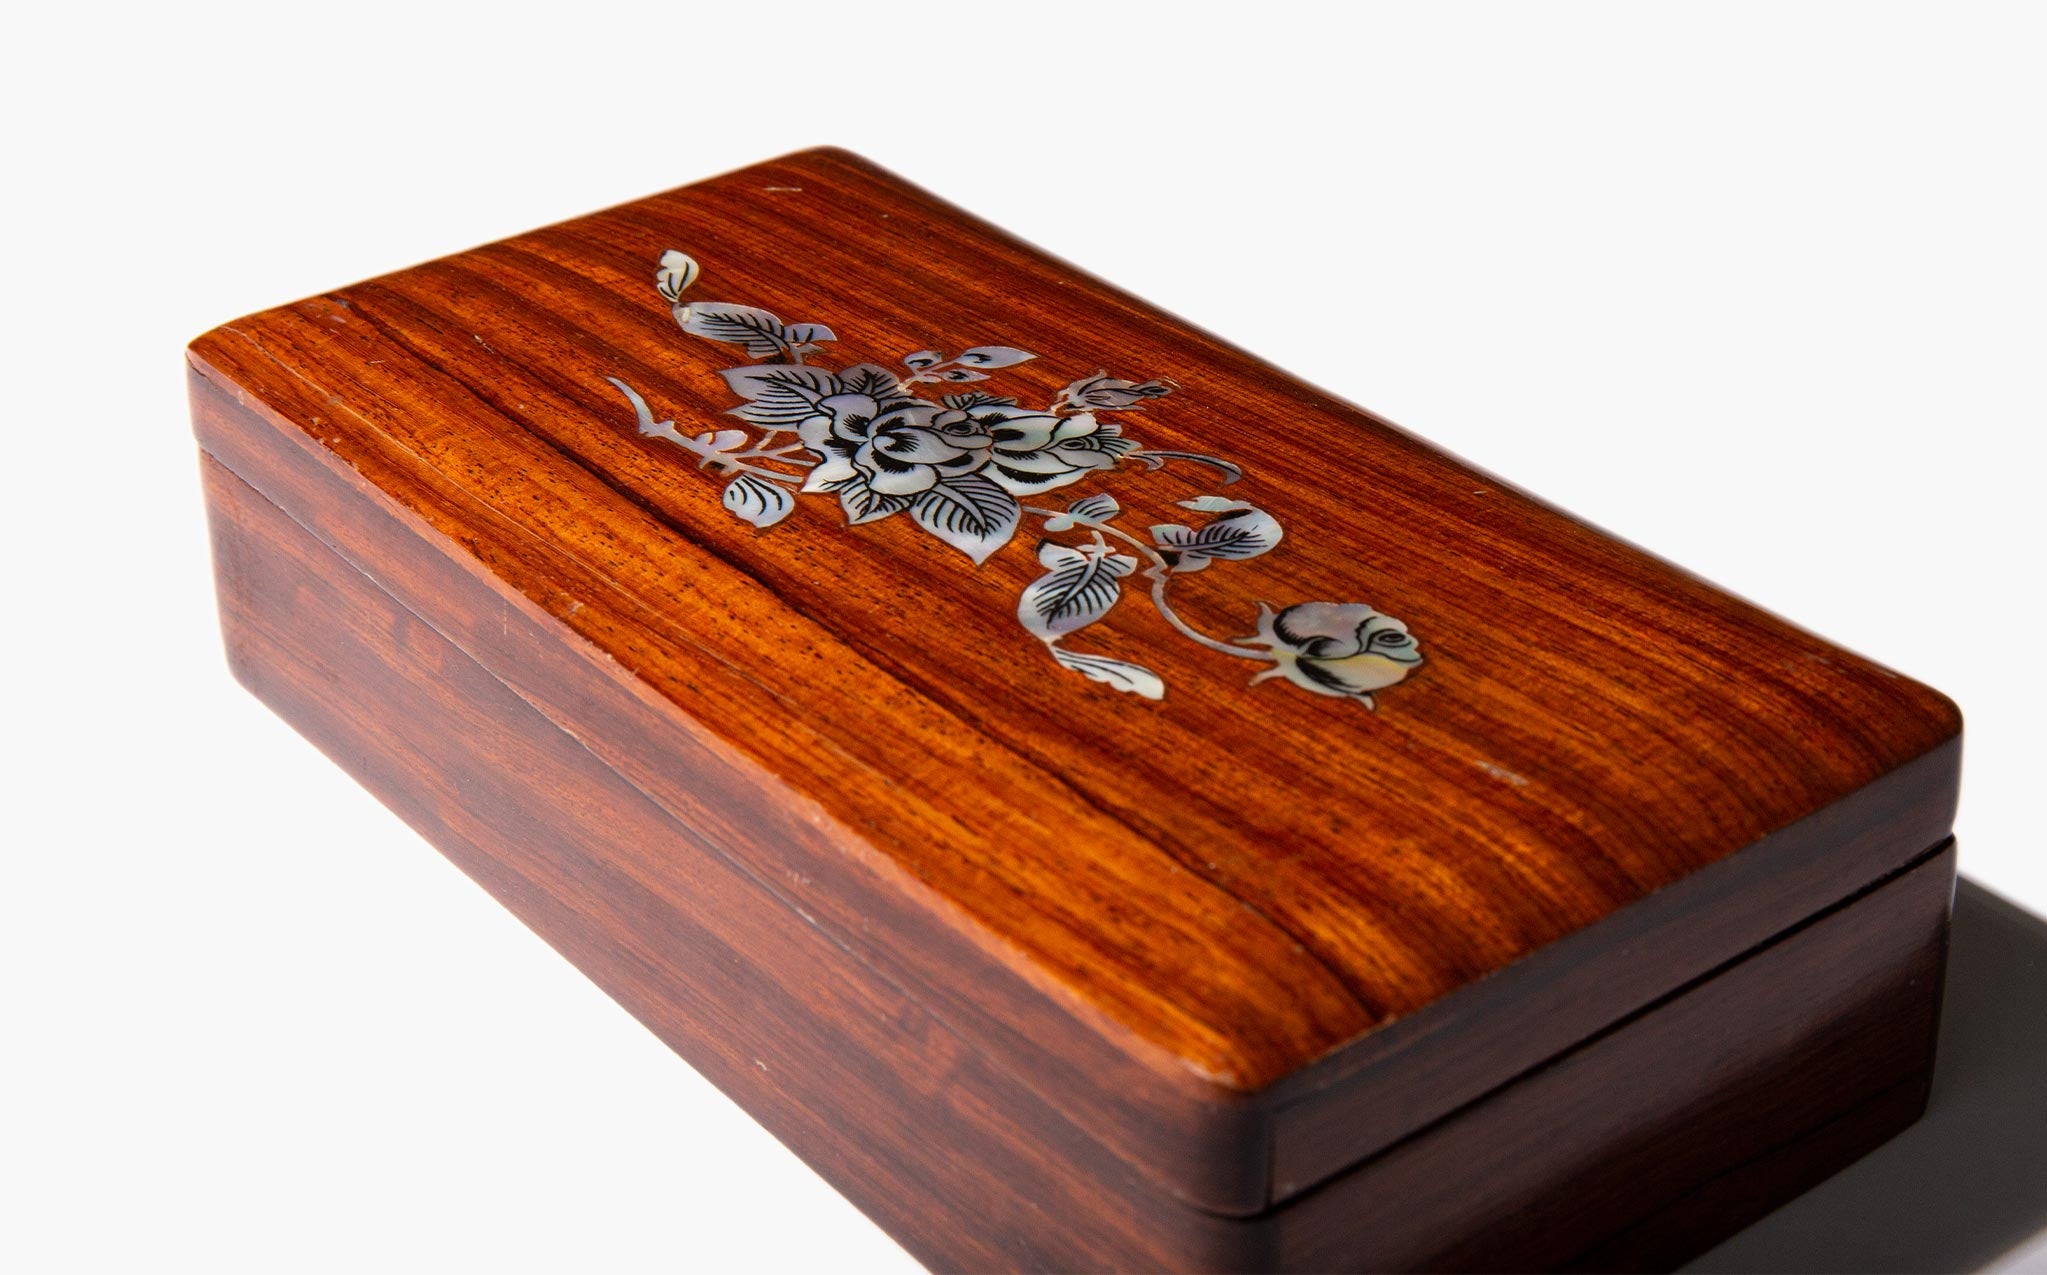 Floral Inlaid Wooden Box